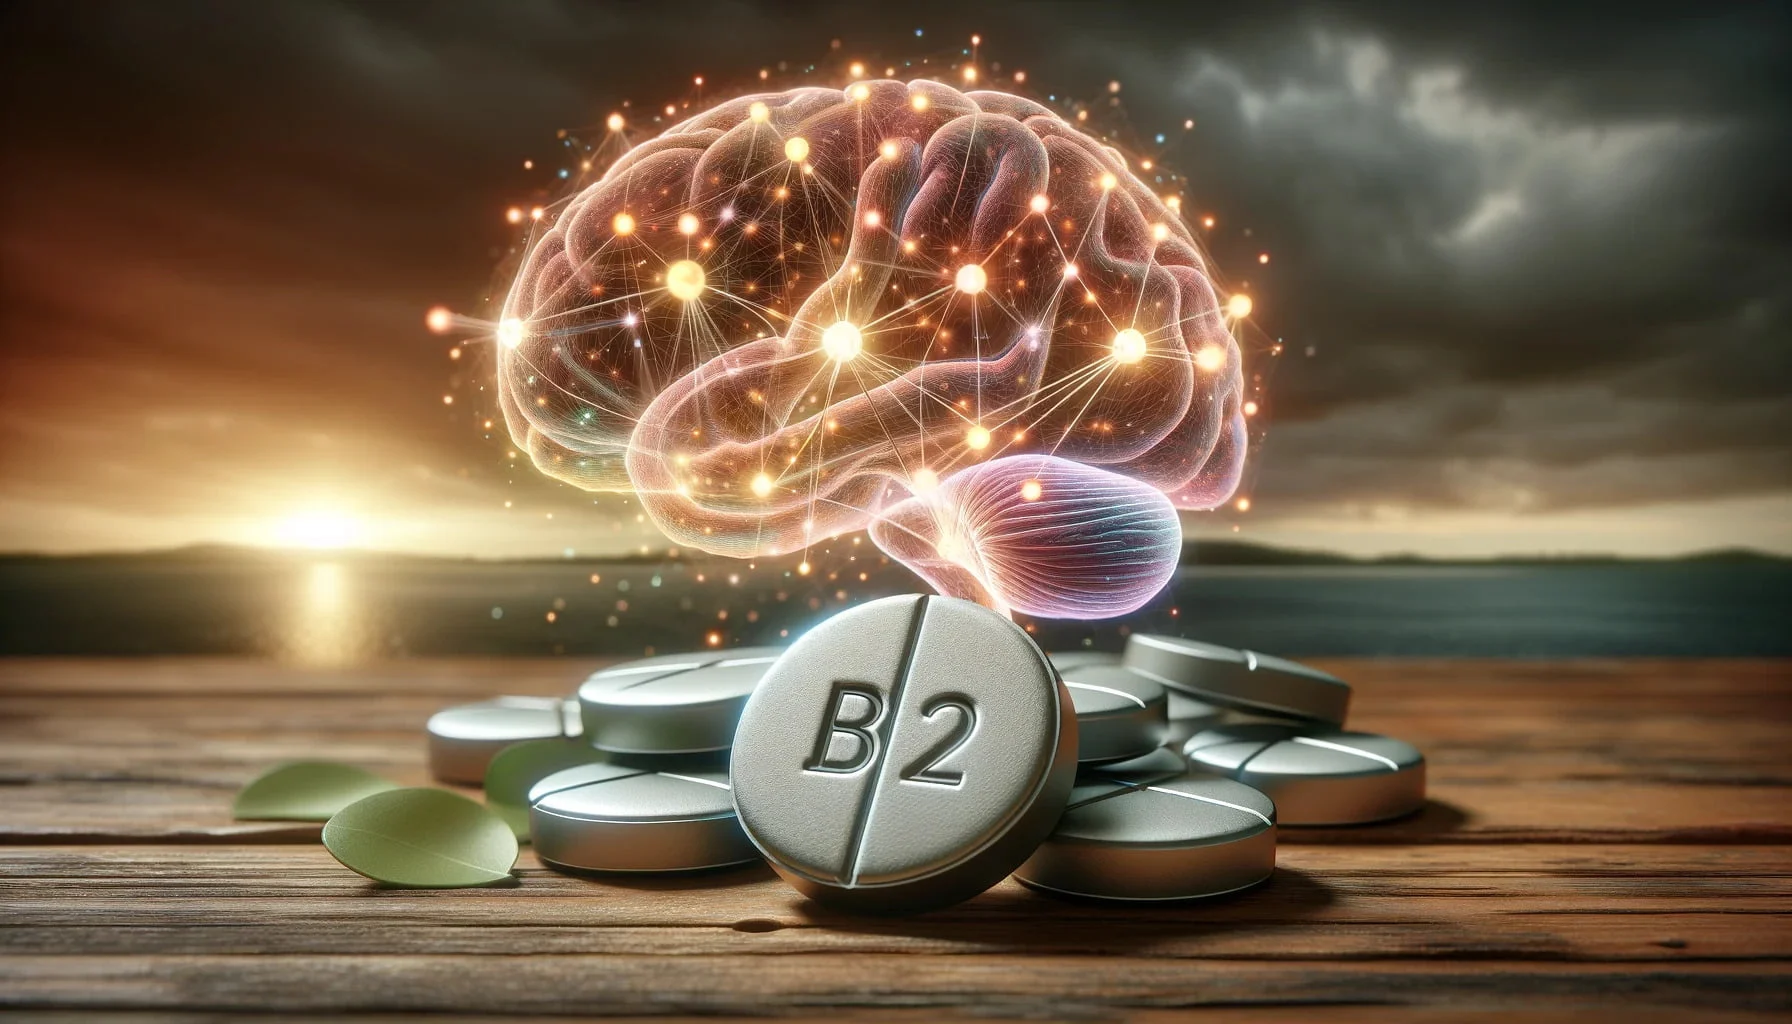 A photorealistic image of b12 vitamin tablet with a brain depicted in the background.